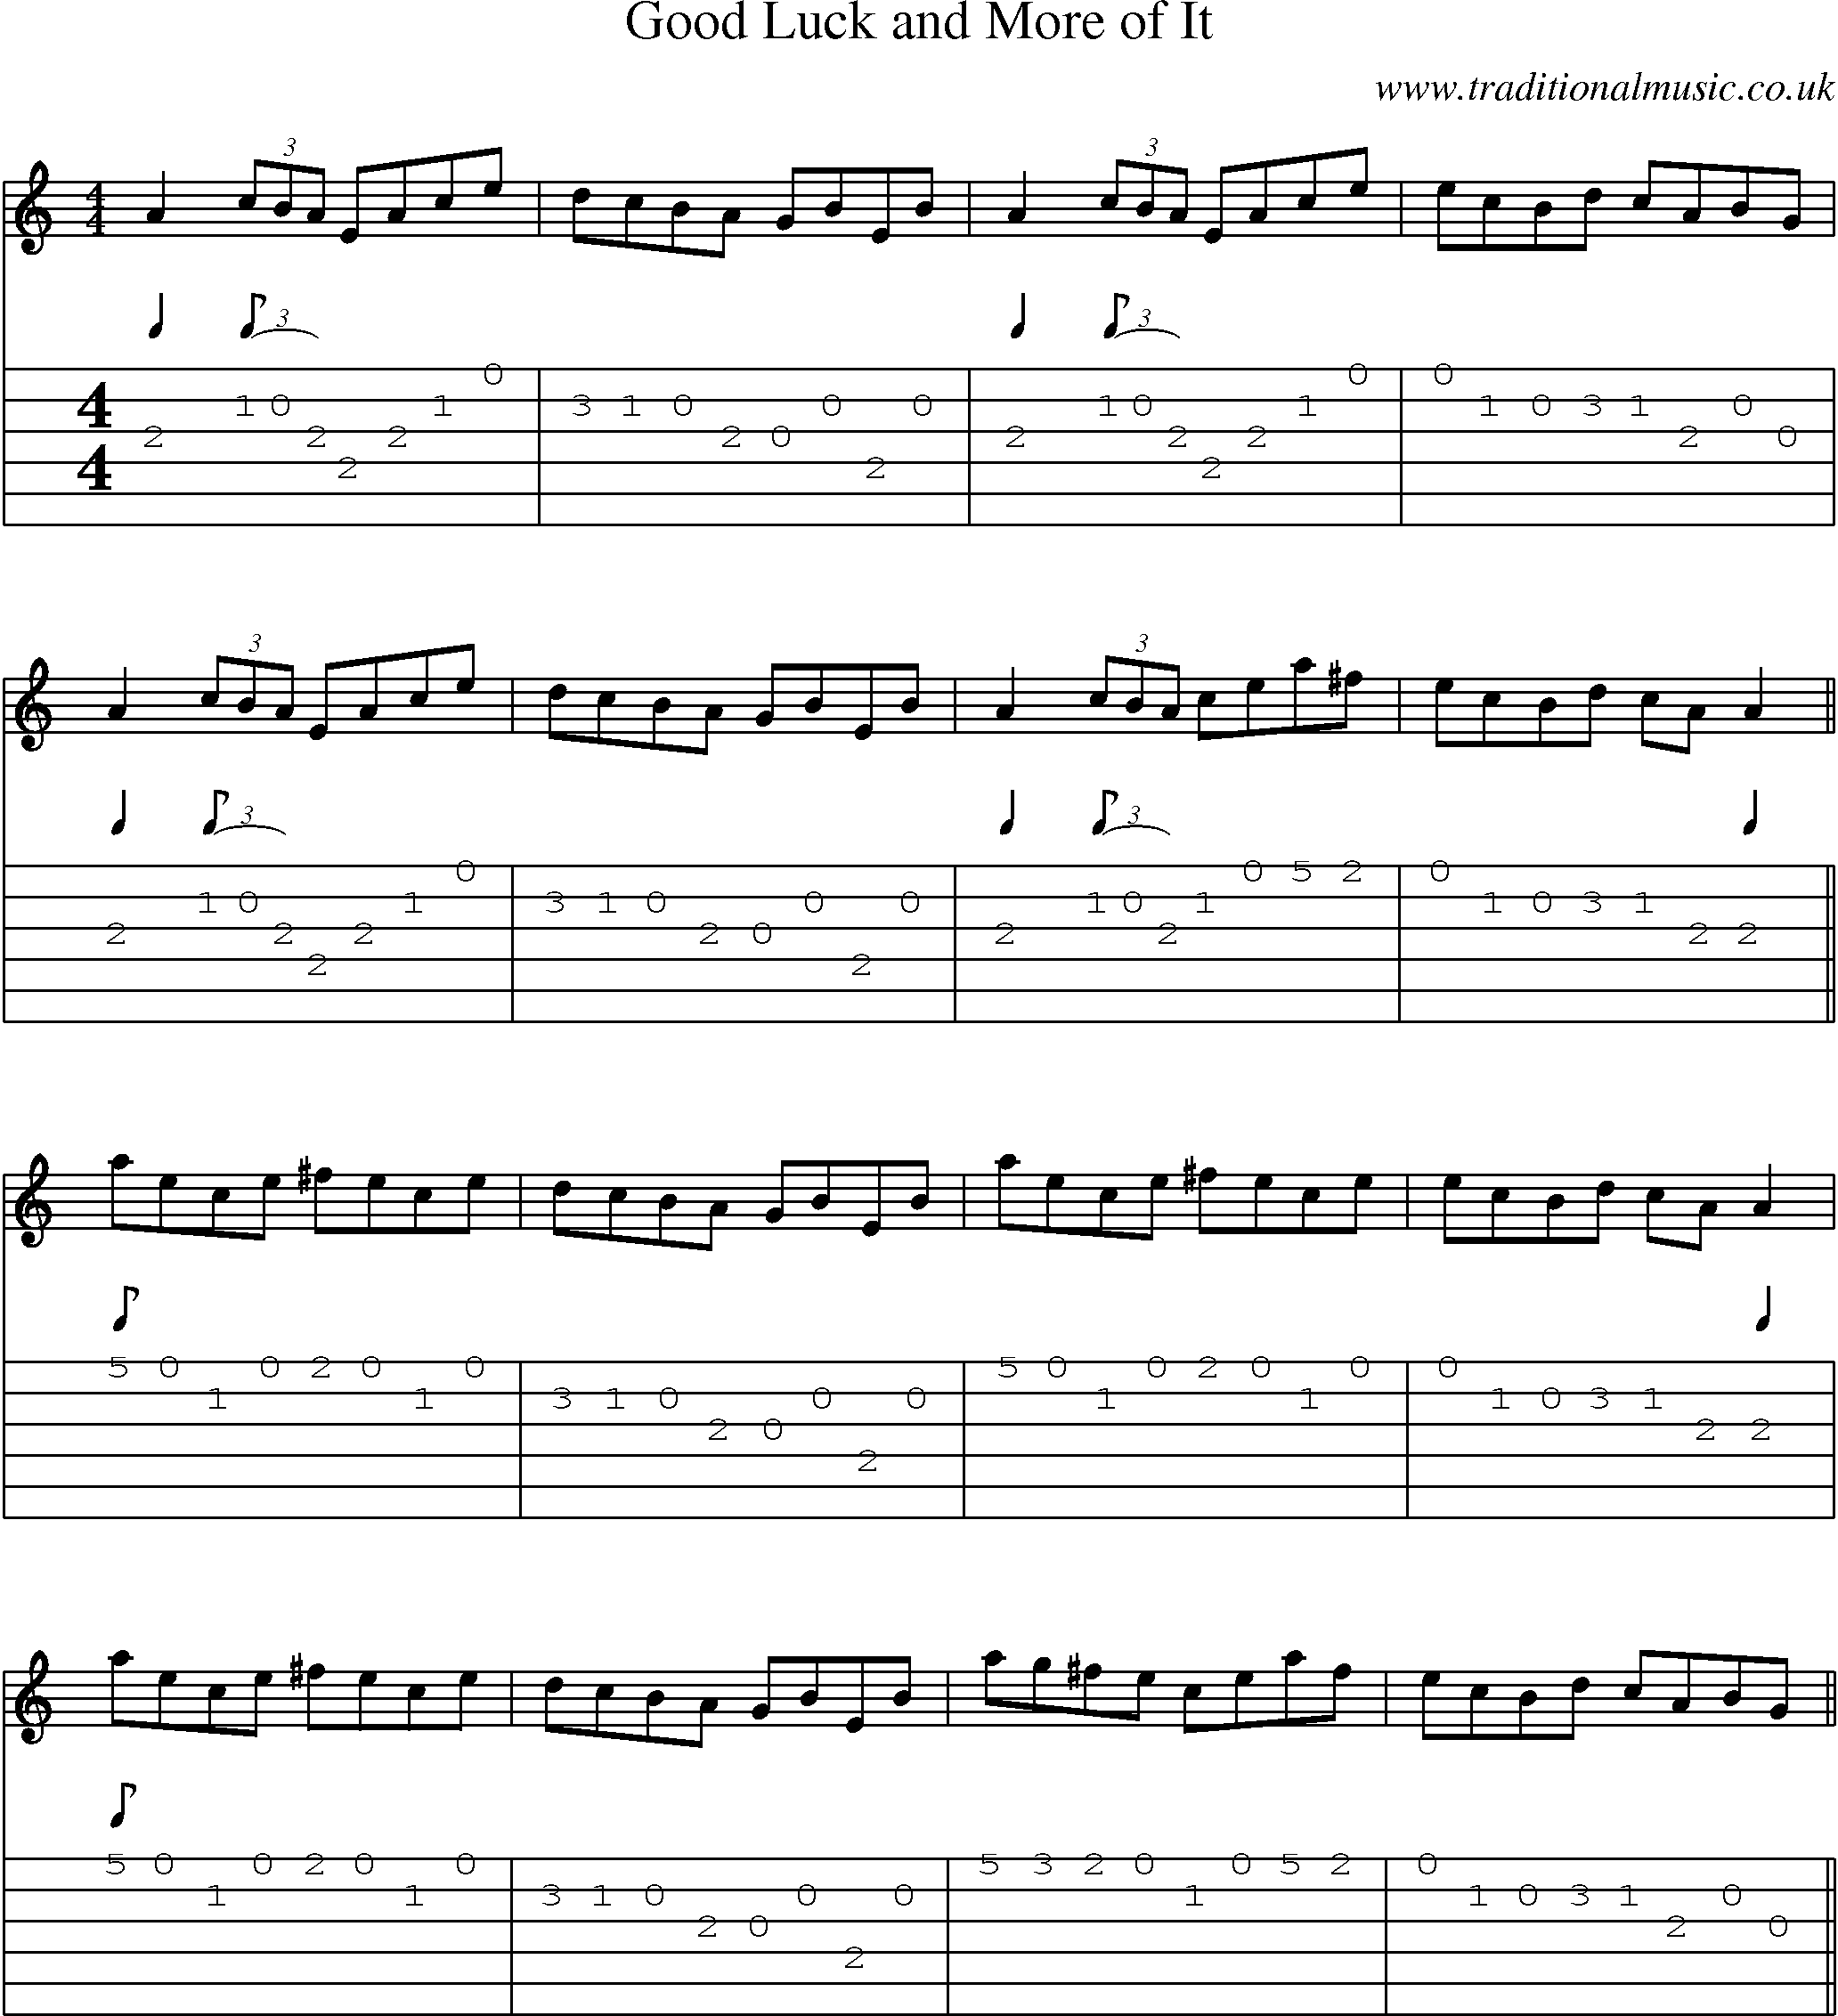 Music Score and Guitar Tabs for Good Luck And More Of It